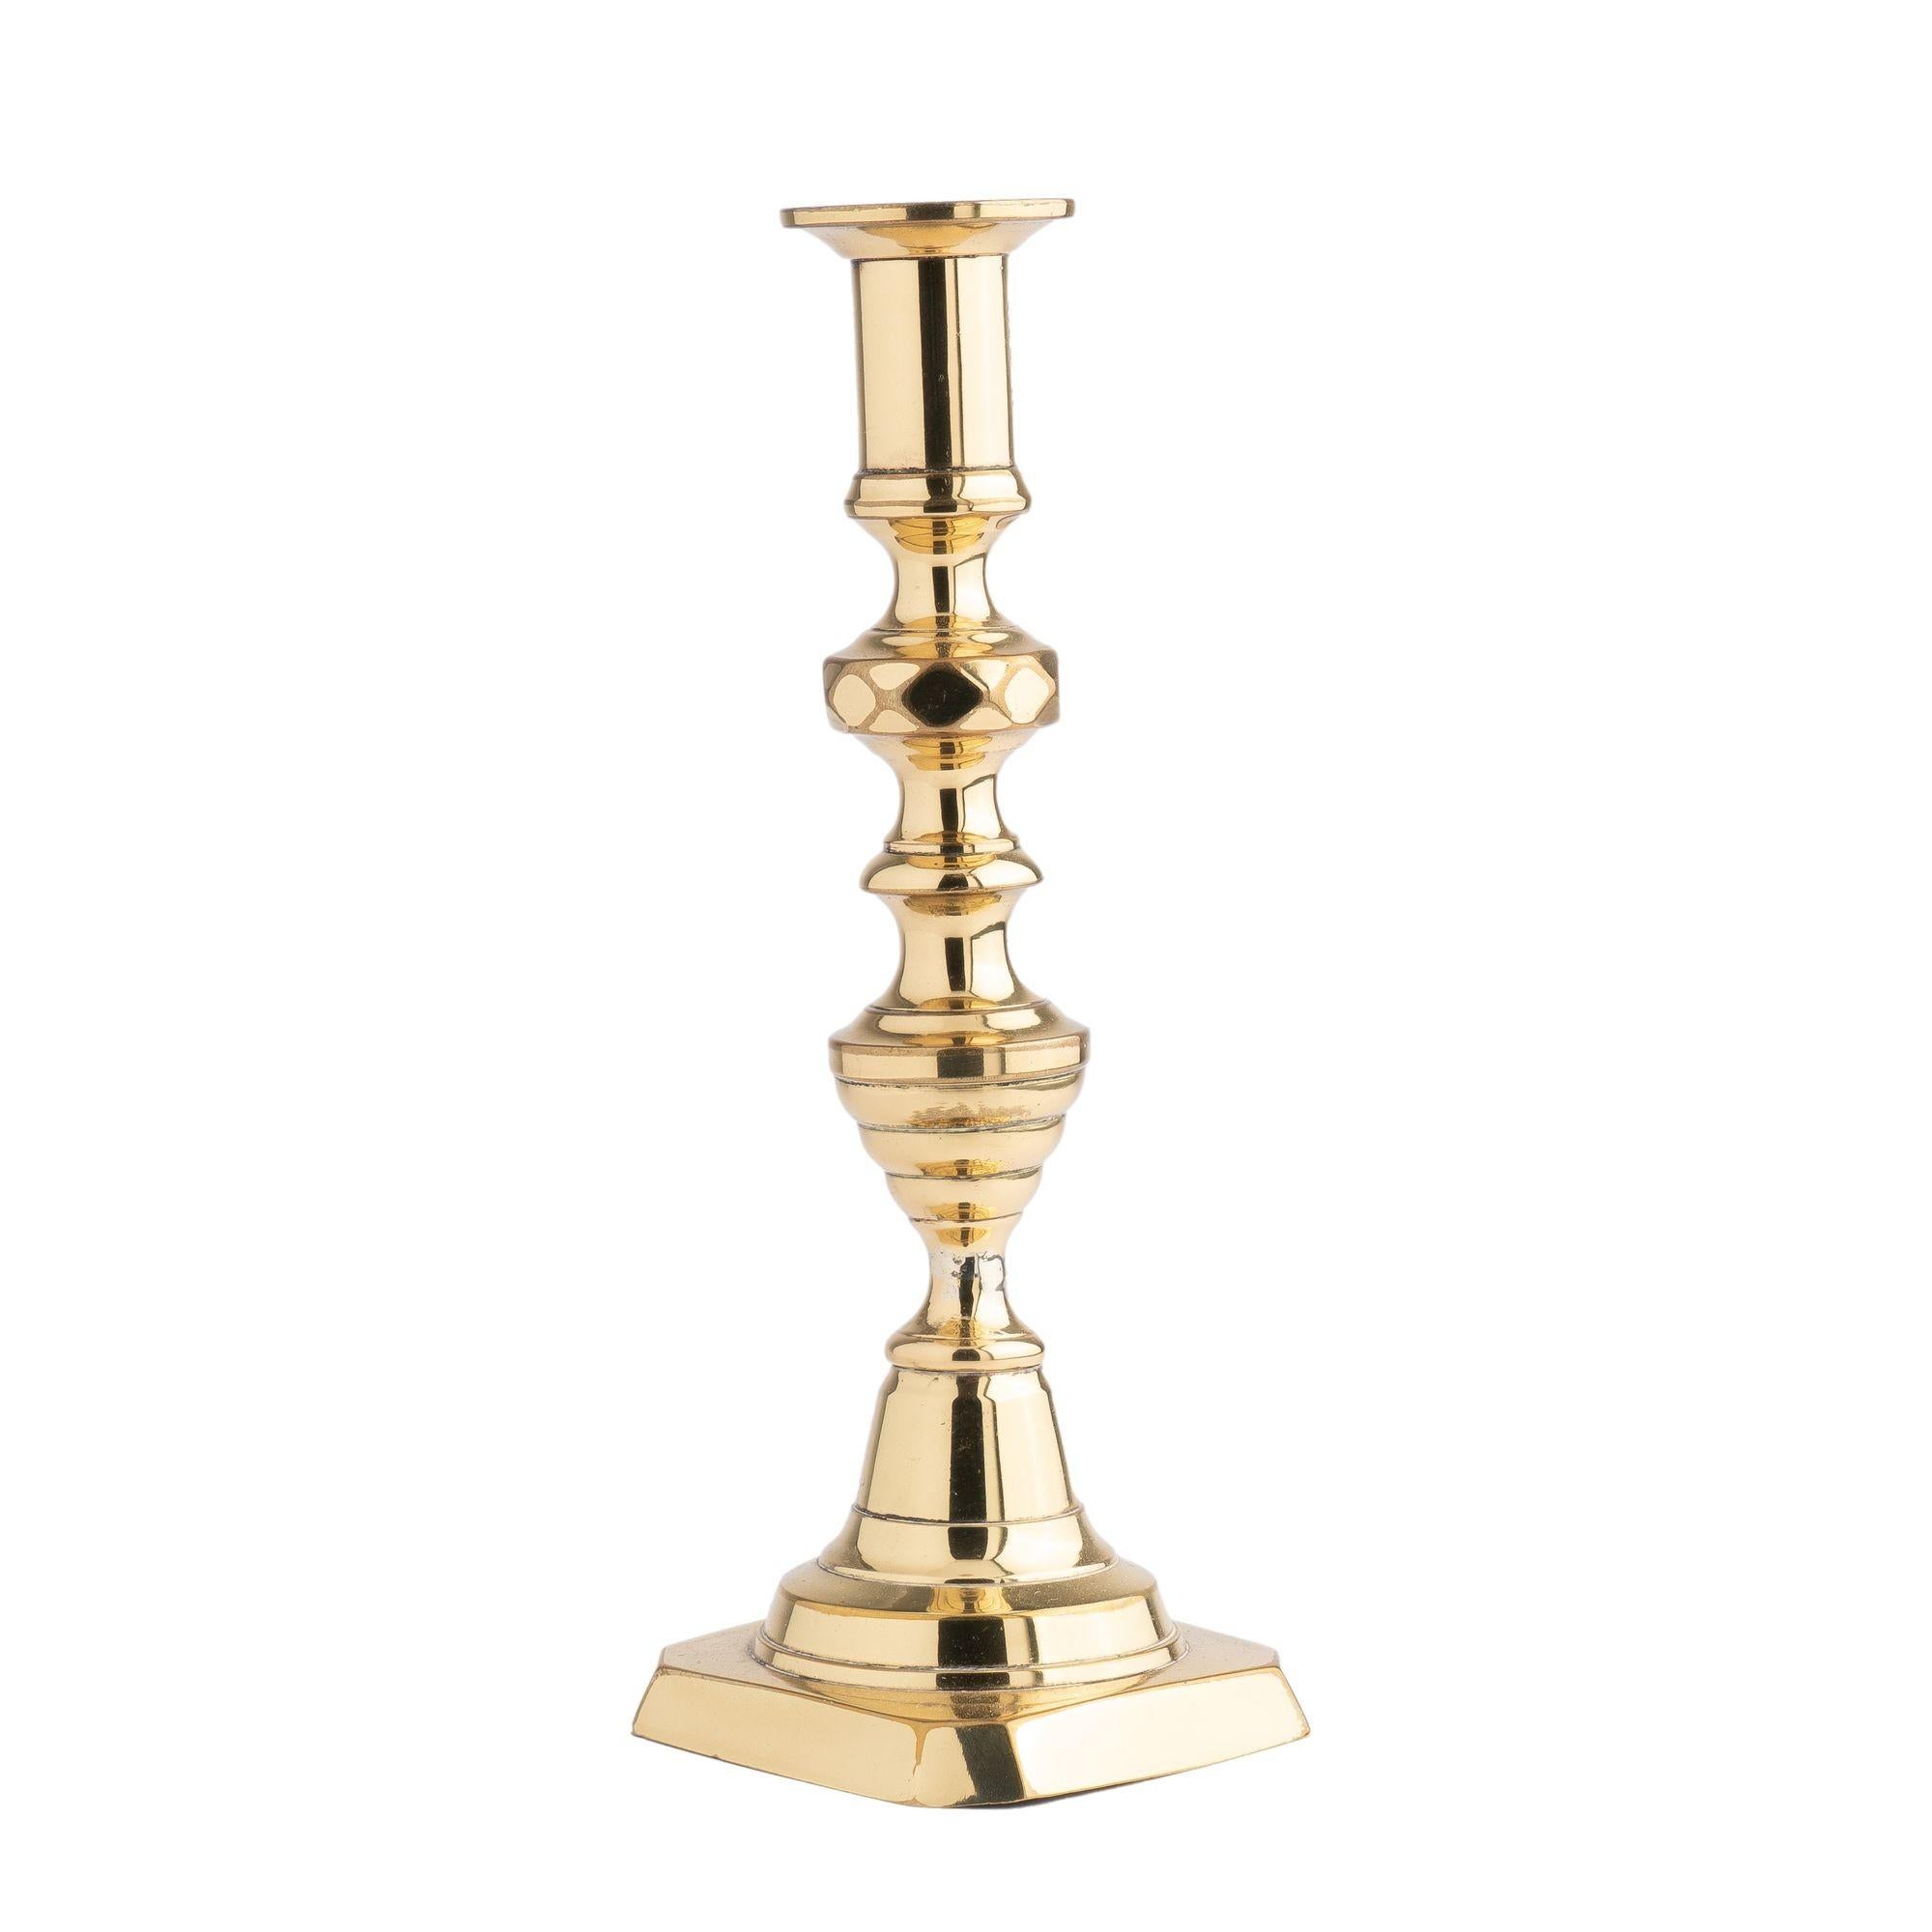 English hollow core cast brass inverted beehive candlestick. The elongated urn form candle cup with bobeshe rests on a short pedestal above a diamond faceted knob. The candle shaft features a waisted interval to an inverted beehive on a conical